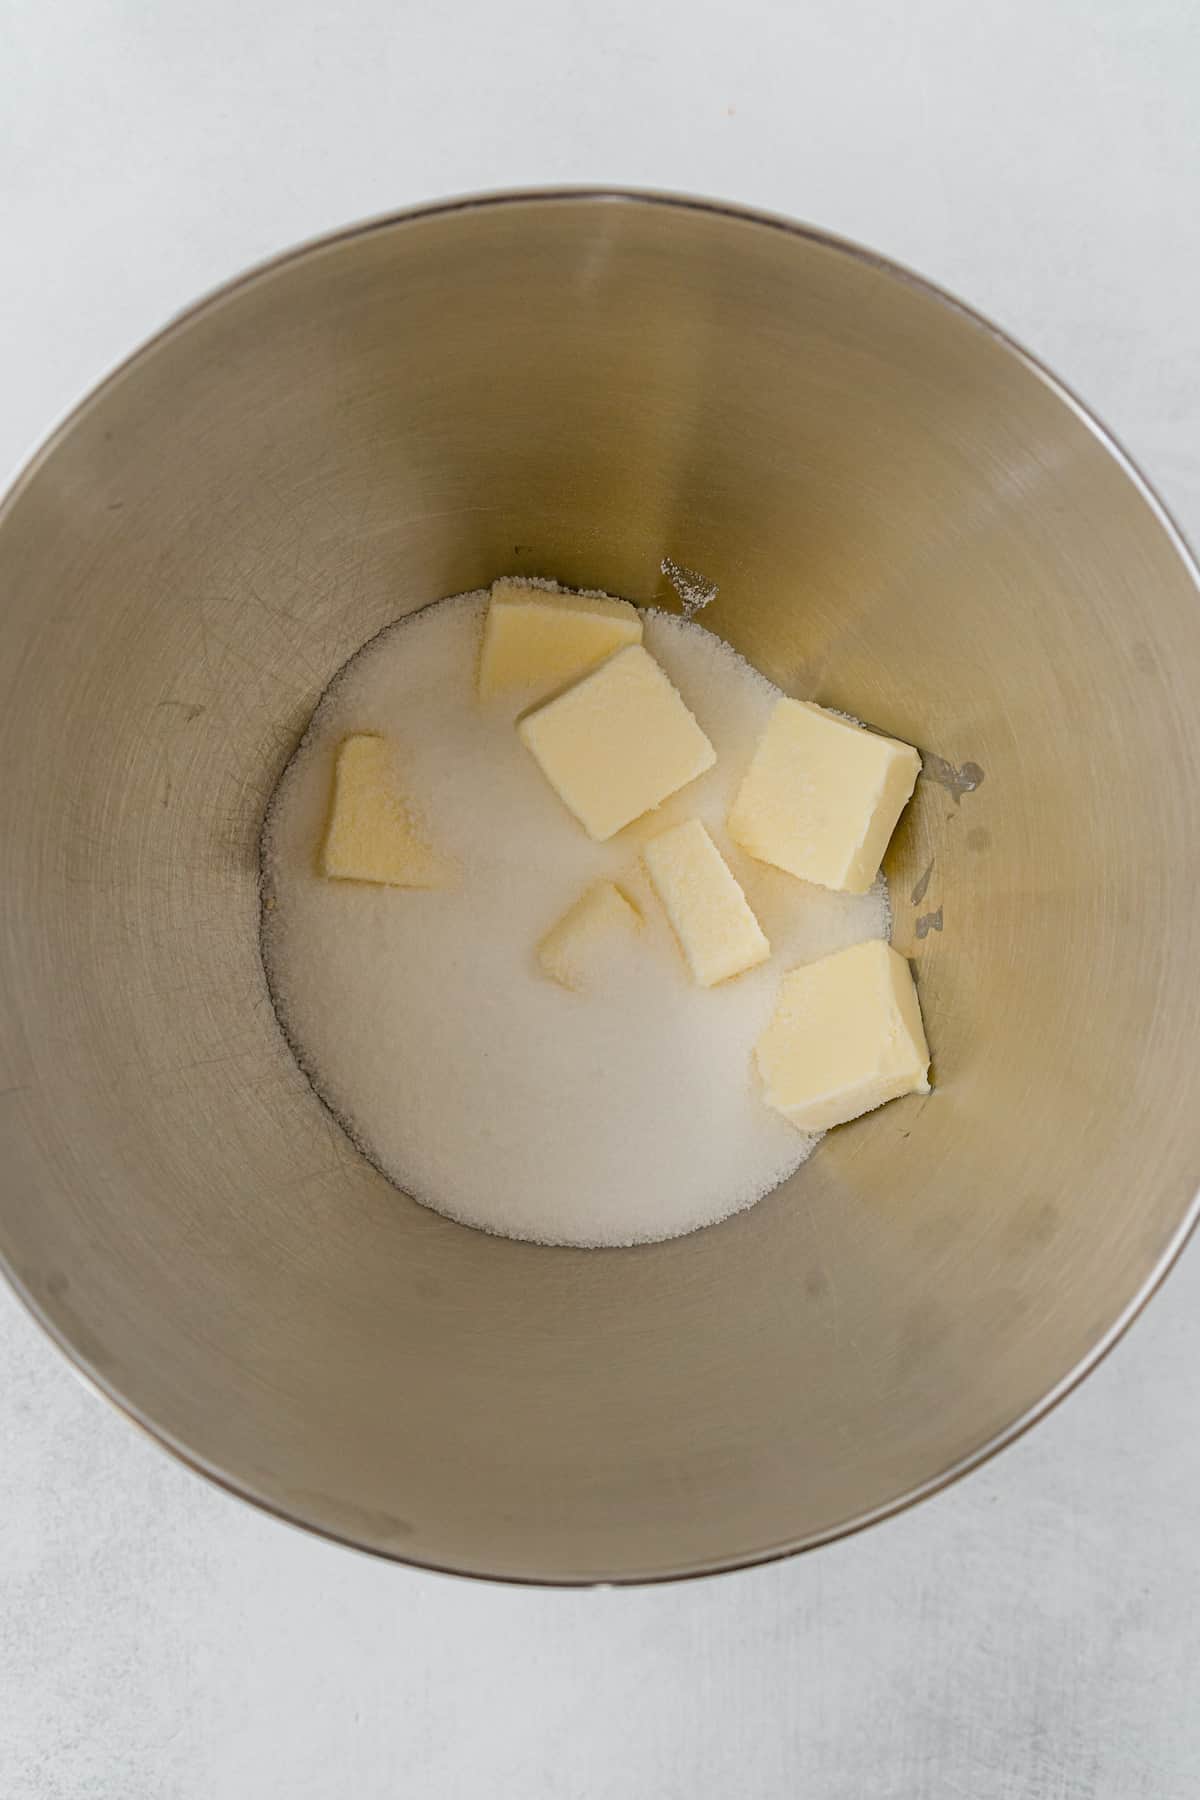 Sugar and butter in a stainless bowl.